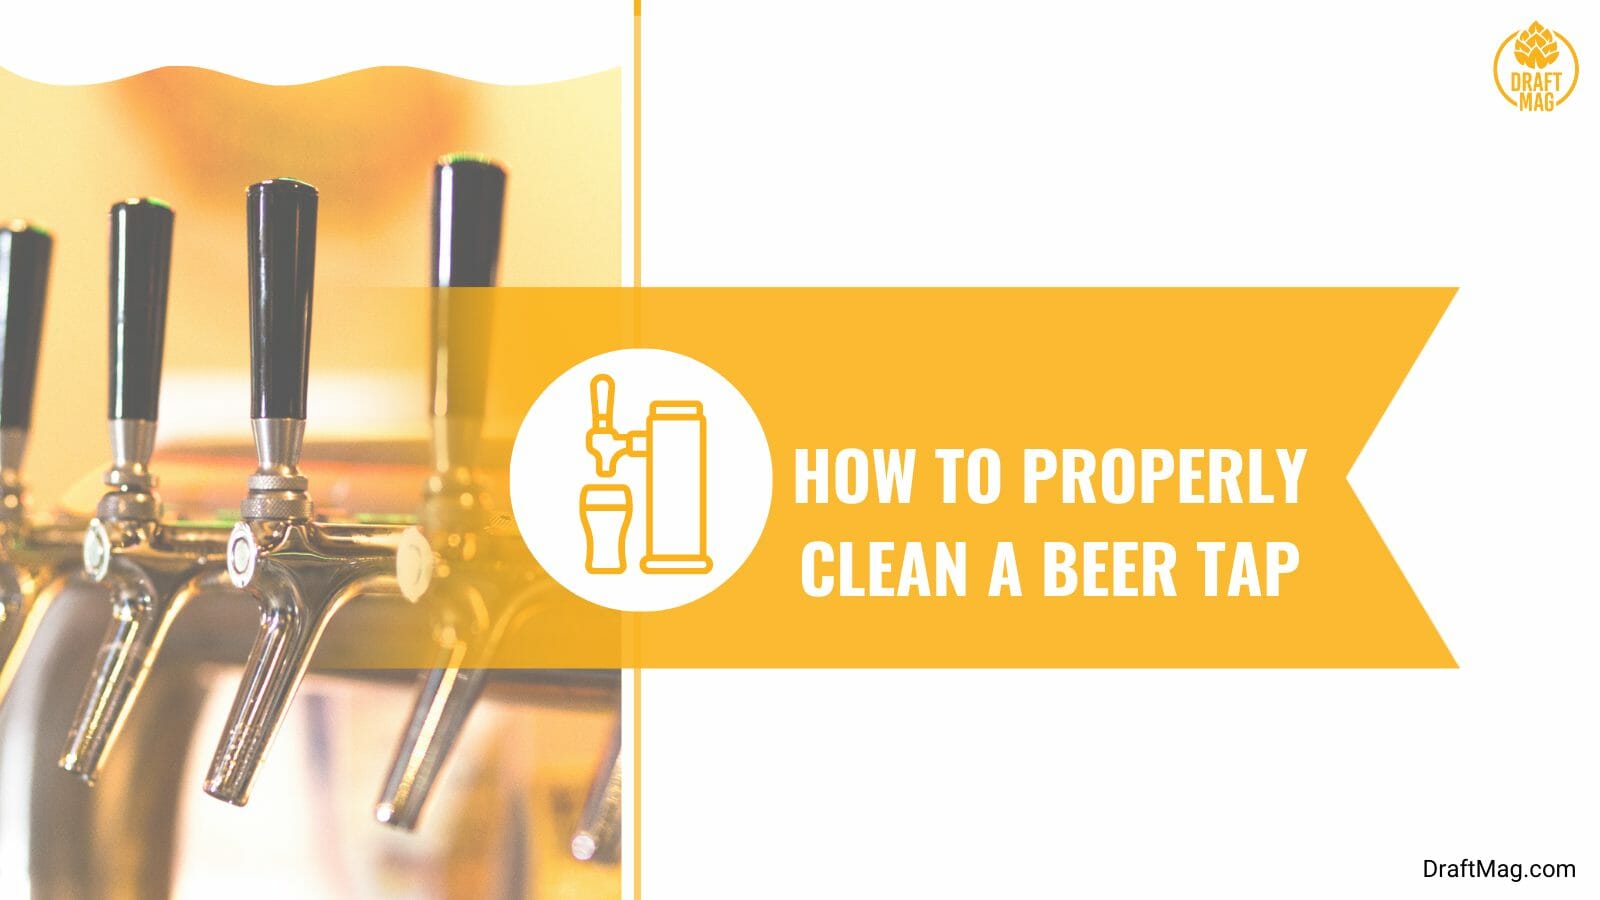 Properly clean a beer tap